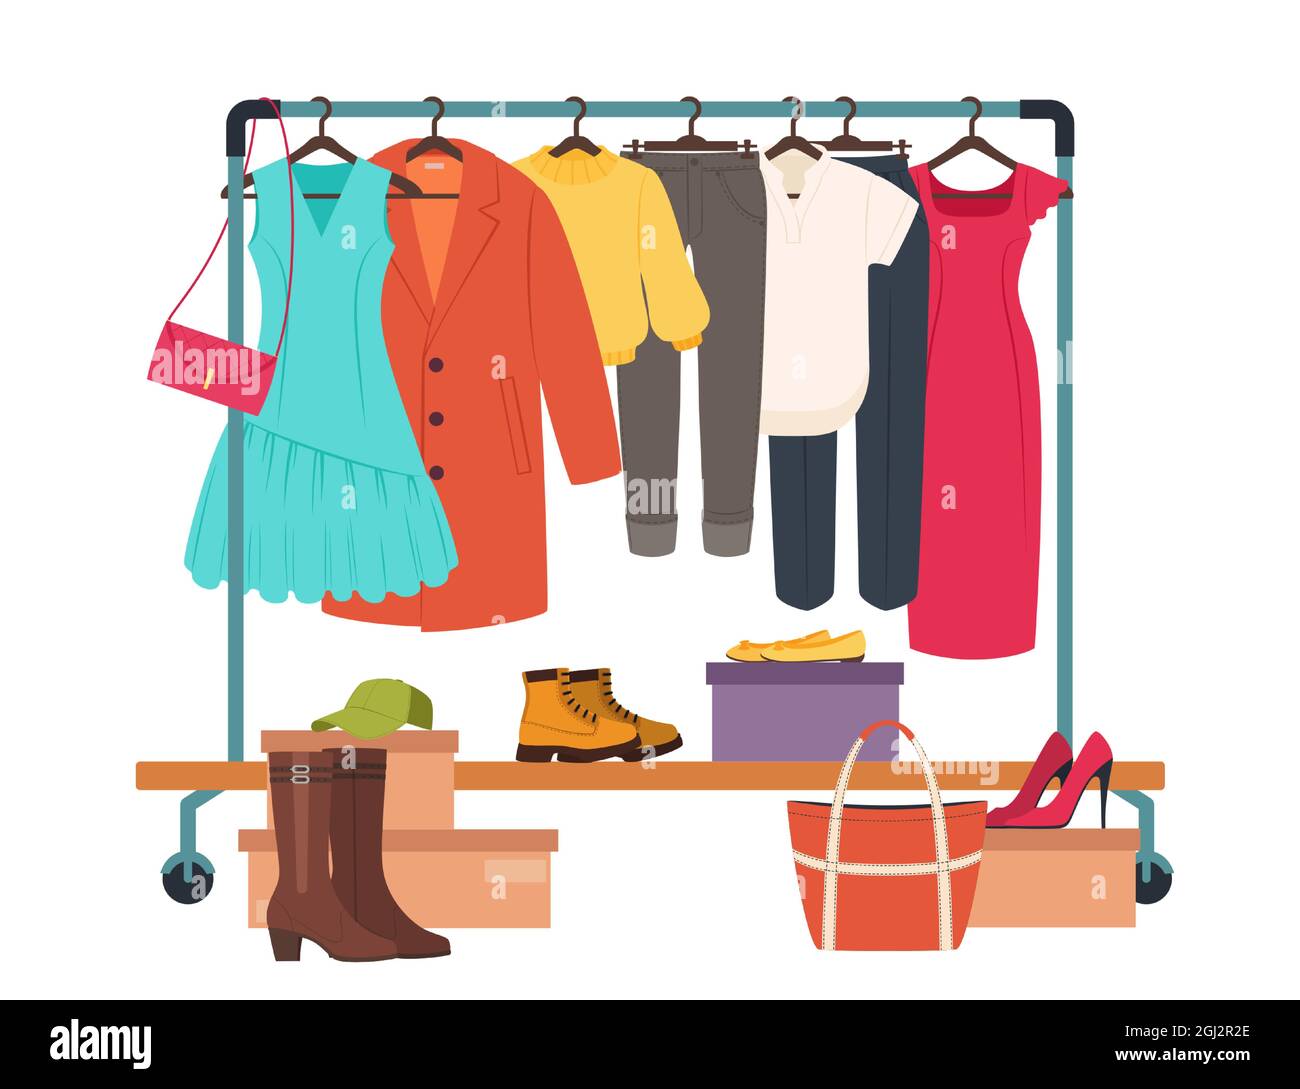 Clothes hanging on rack, garment rail with casual women clothing. Fashion girl wardrobe, female clothes on hangers vector illustration. Apparel as dress, coat, trousers and accessories Stock Vector